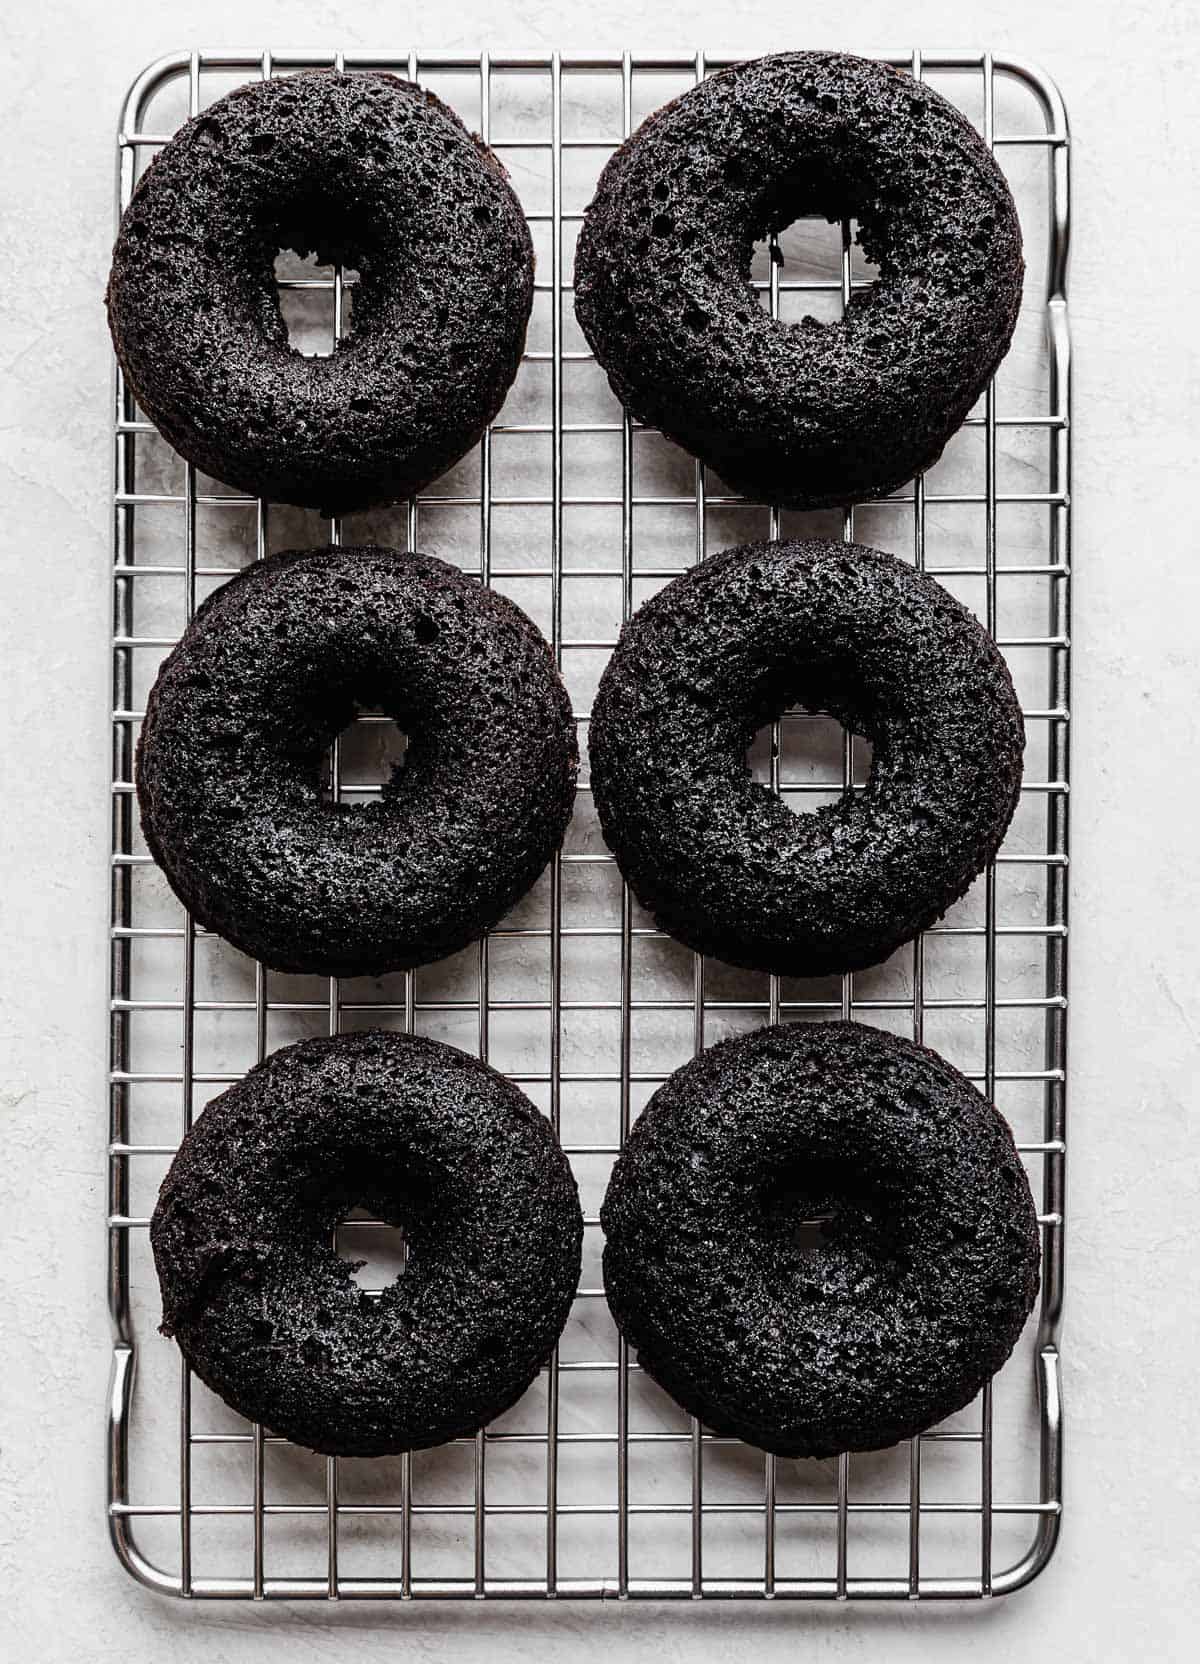 Six baked Oreo Donuts on a wire cooling rack.